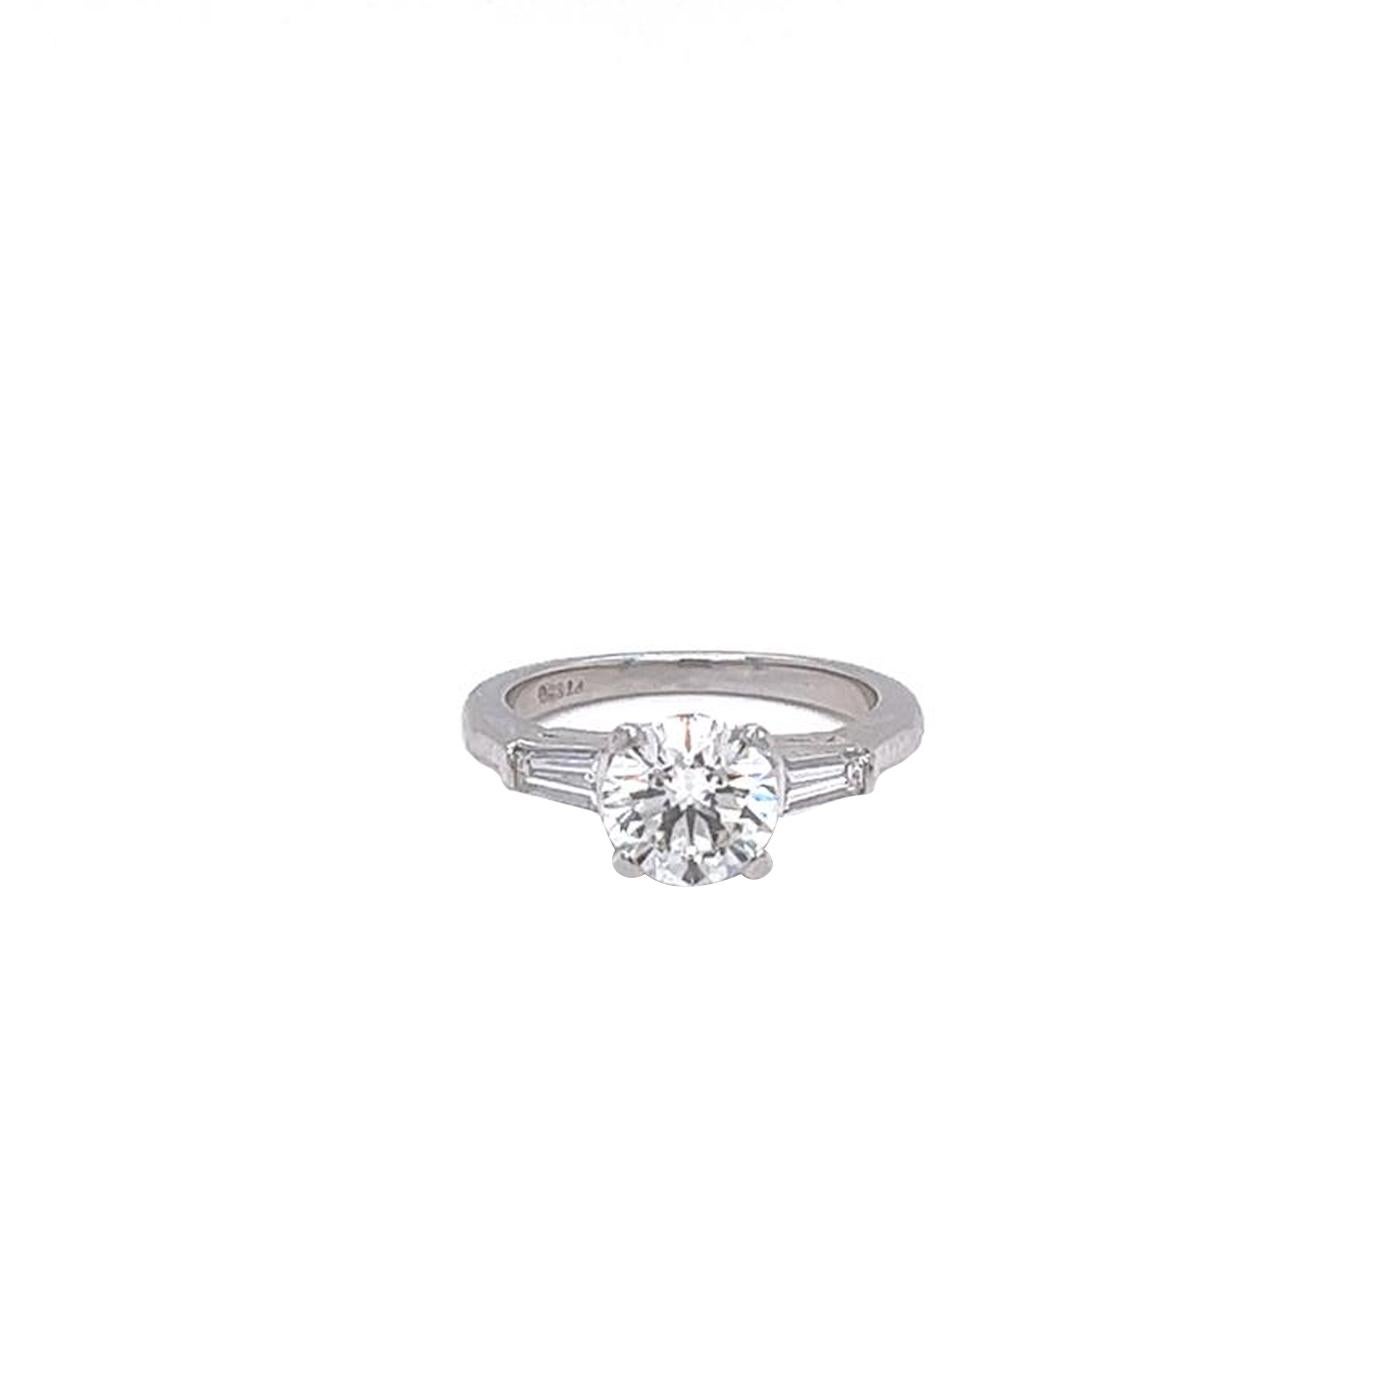 Round Cut 1.05ct Natural Round Diamond Platinum Ring With 0.40ct Pave Baguette Diamonds For Sale